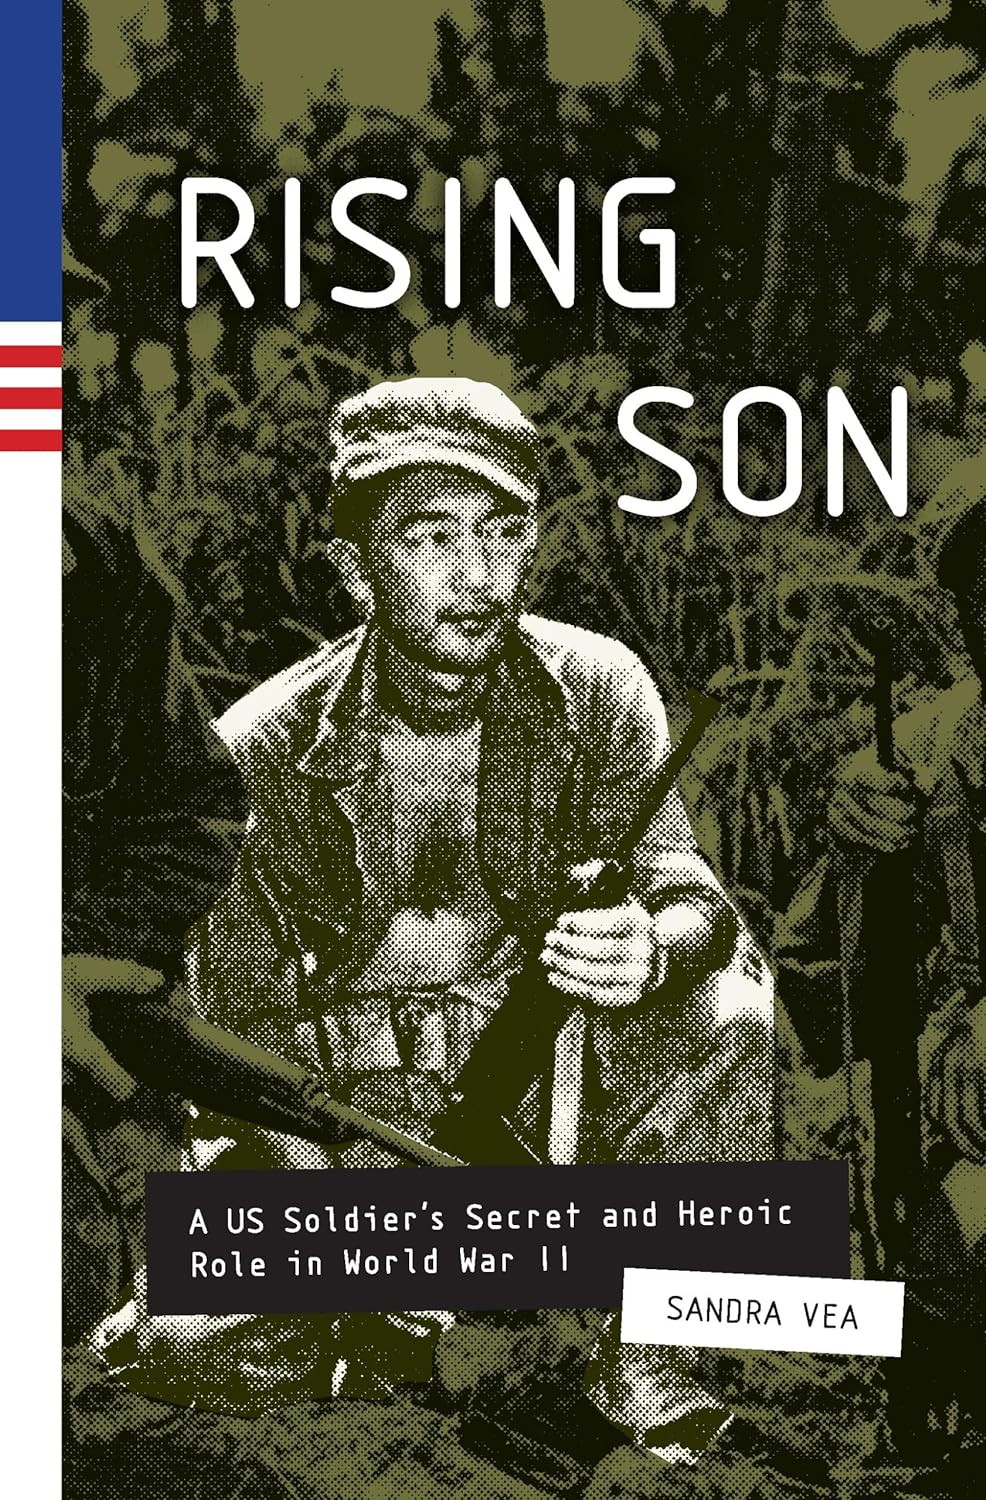 Rising Son: A US Soldiers Secret and Heroic Role in World War II